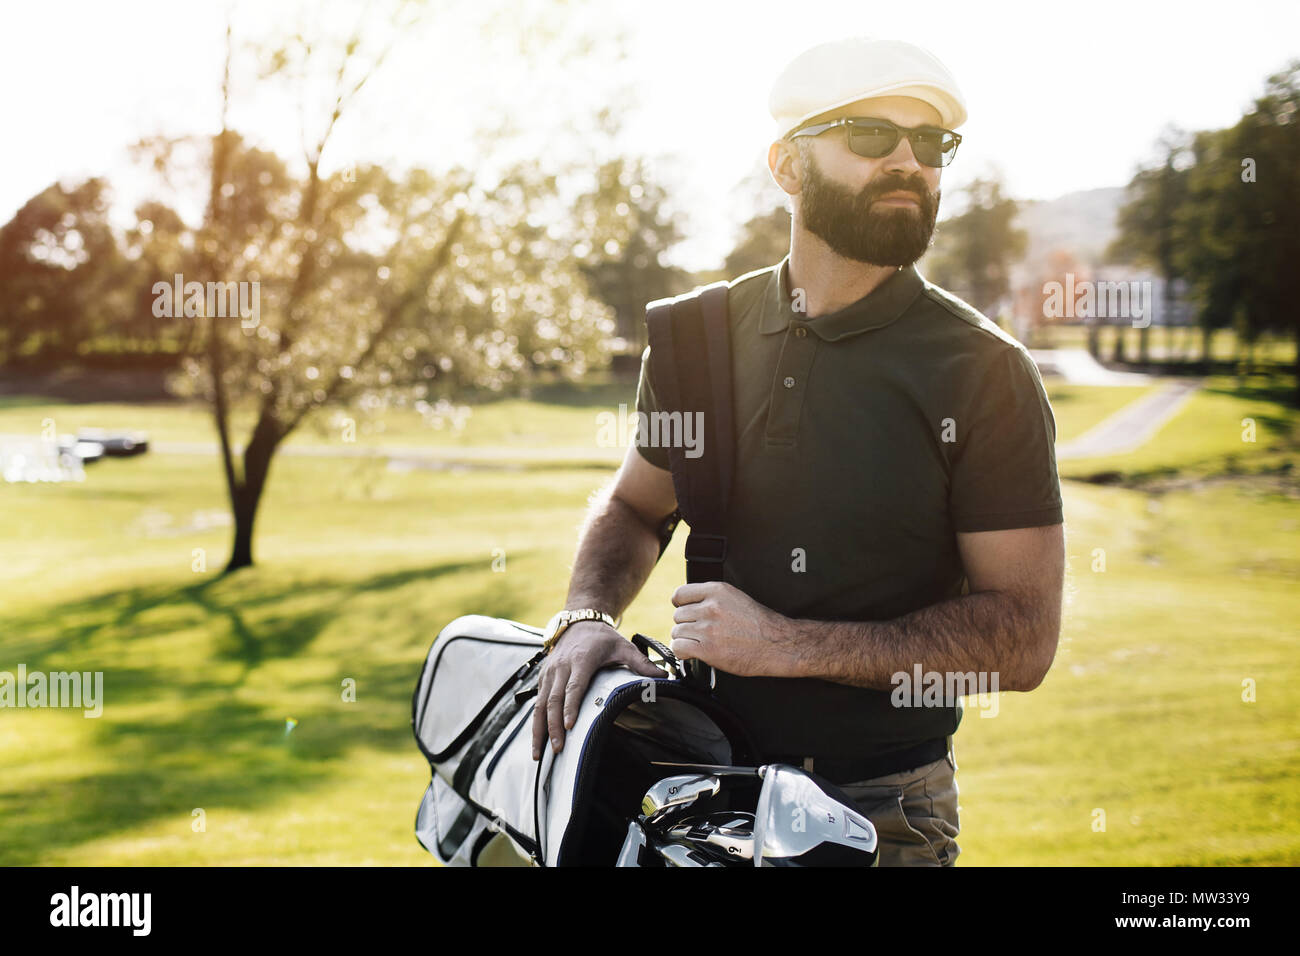 Golf player holding a golf club in golf course Stock Photo